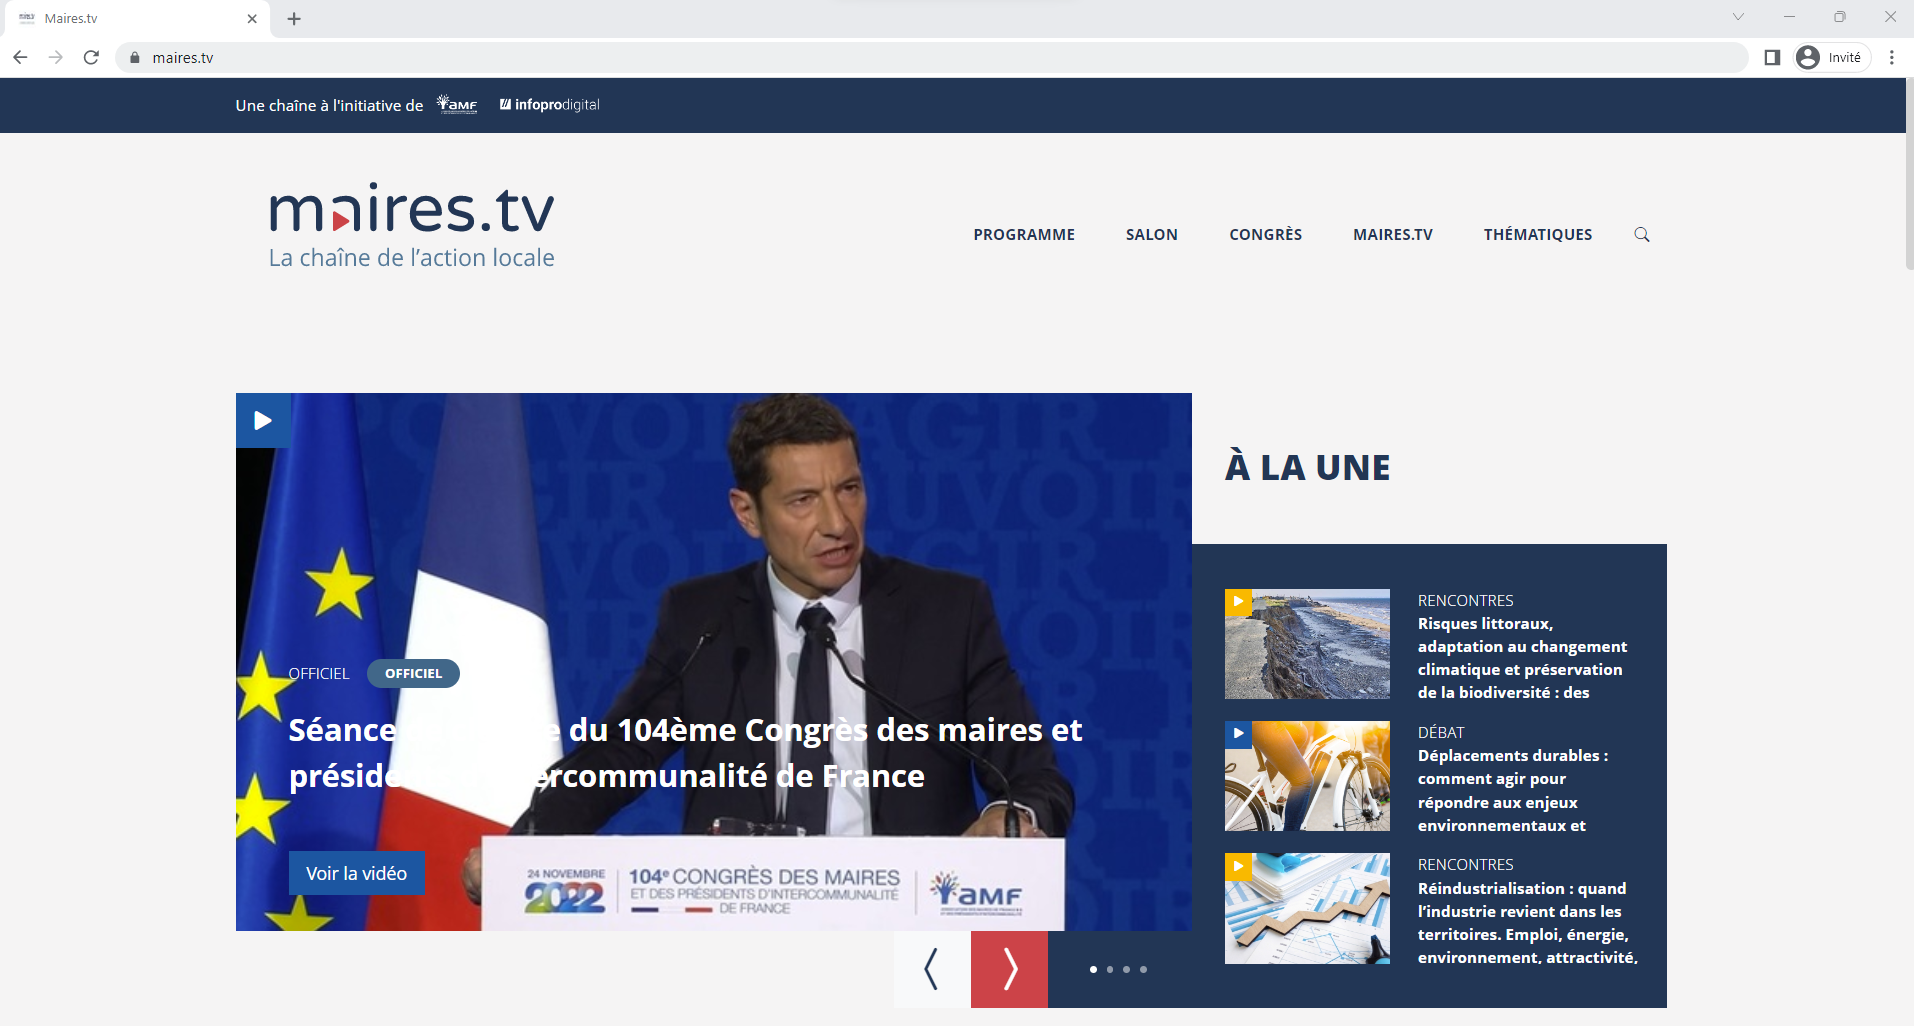 Maires.tv